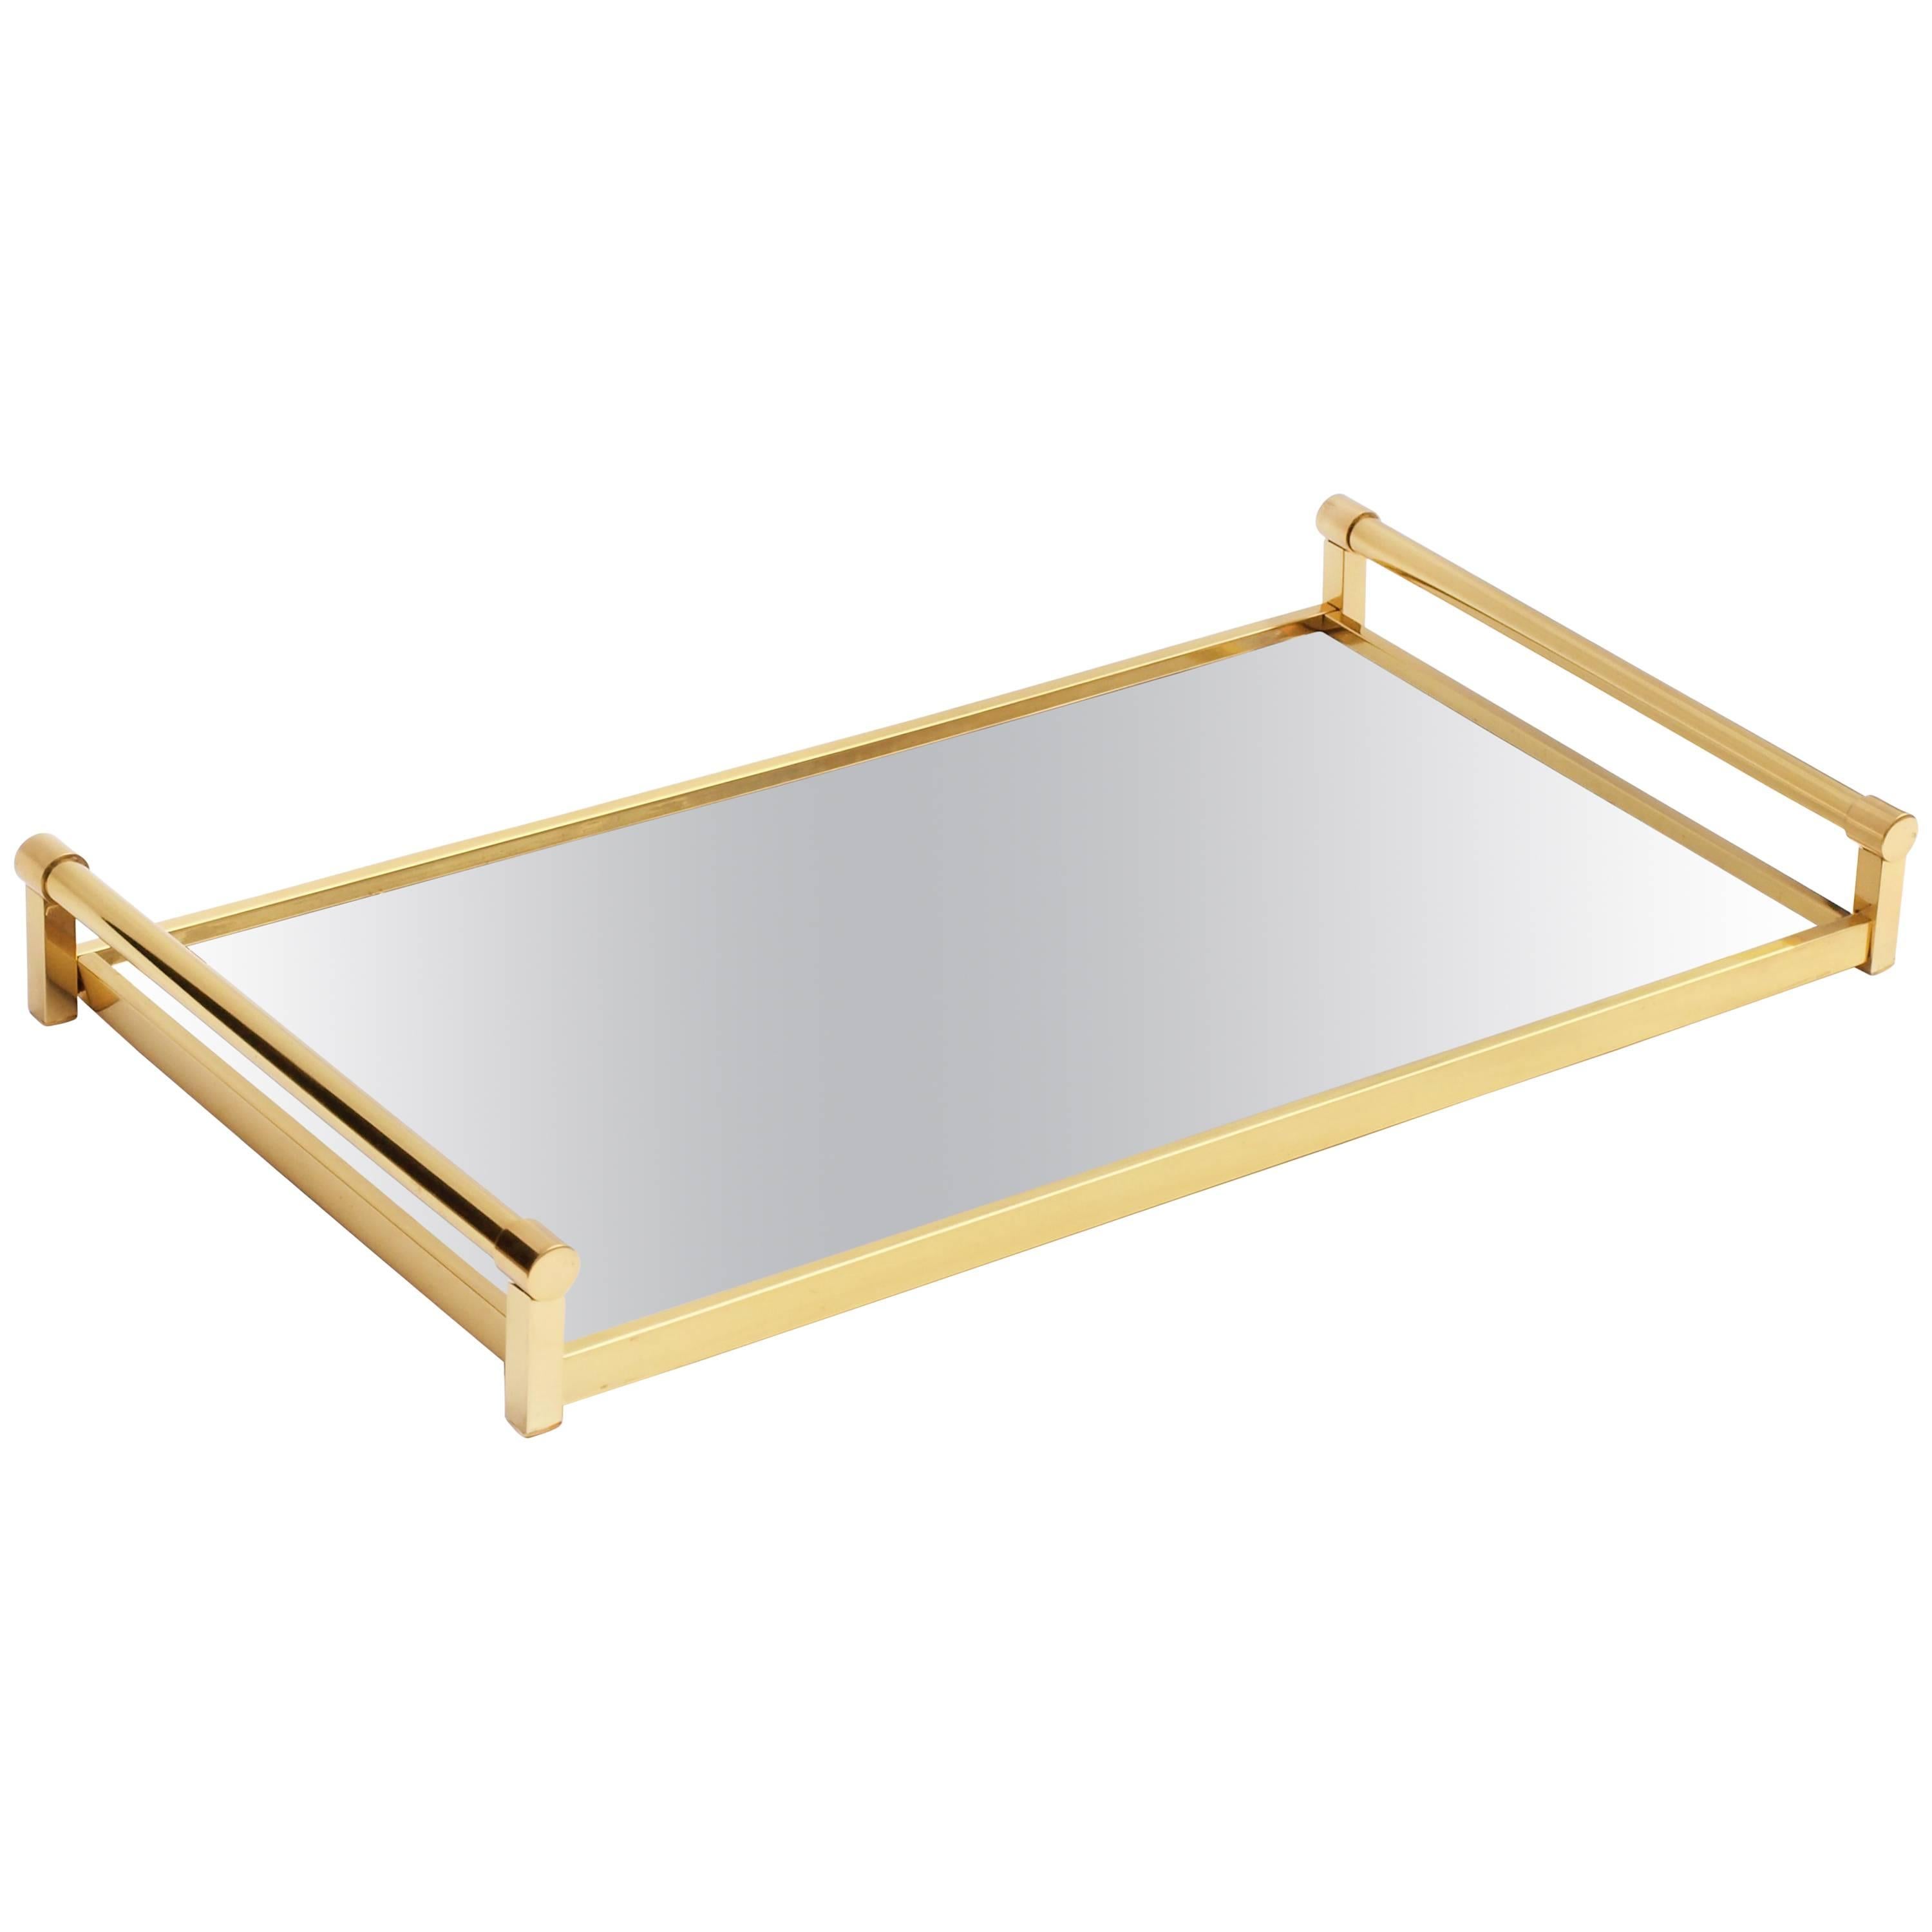 A rare example of this stunning and well documented tray by Jacques Adnet for Compagnie Des Arts Francais , in virtually unused condition. 
Exuding style in its simplicity, the tray is finished in polished brass and mirrored glass base that